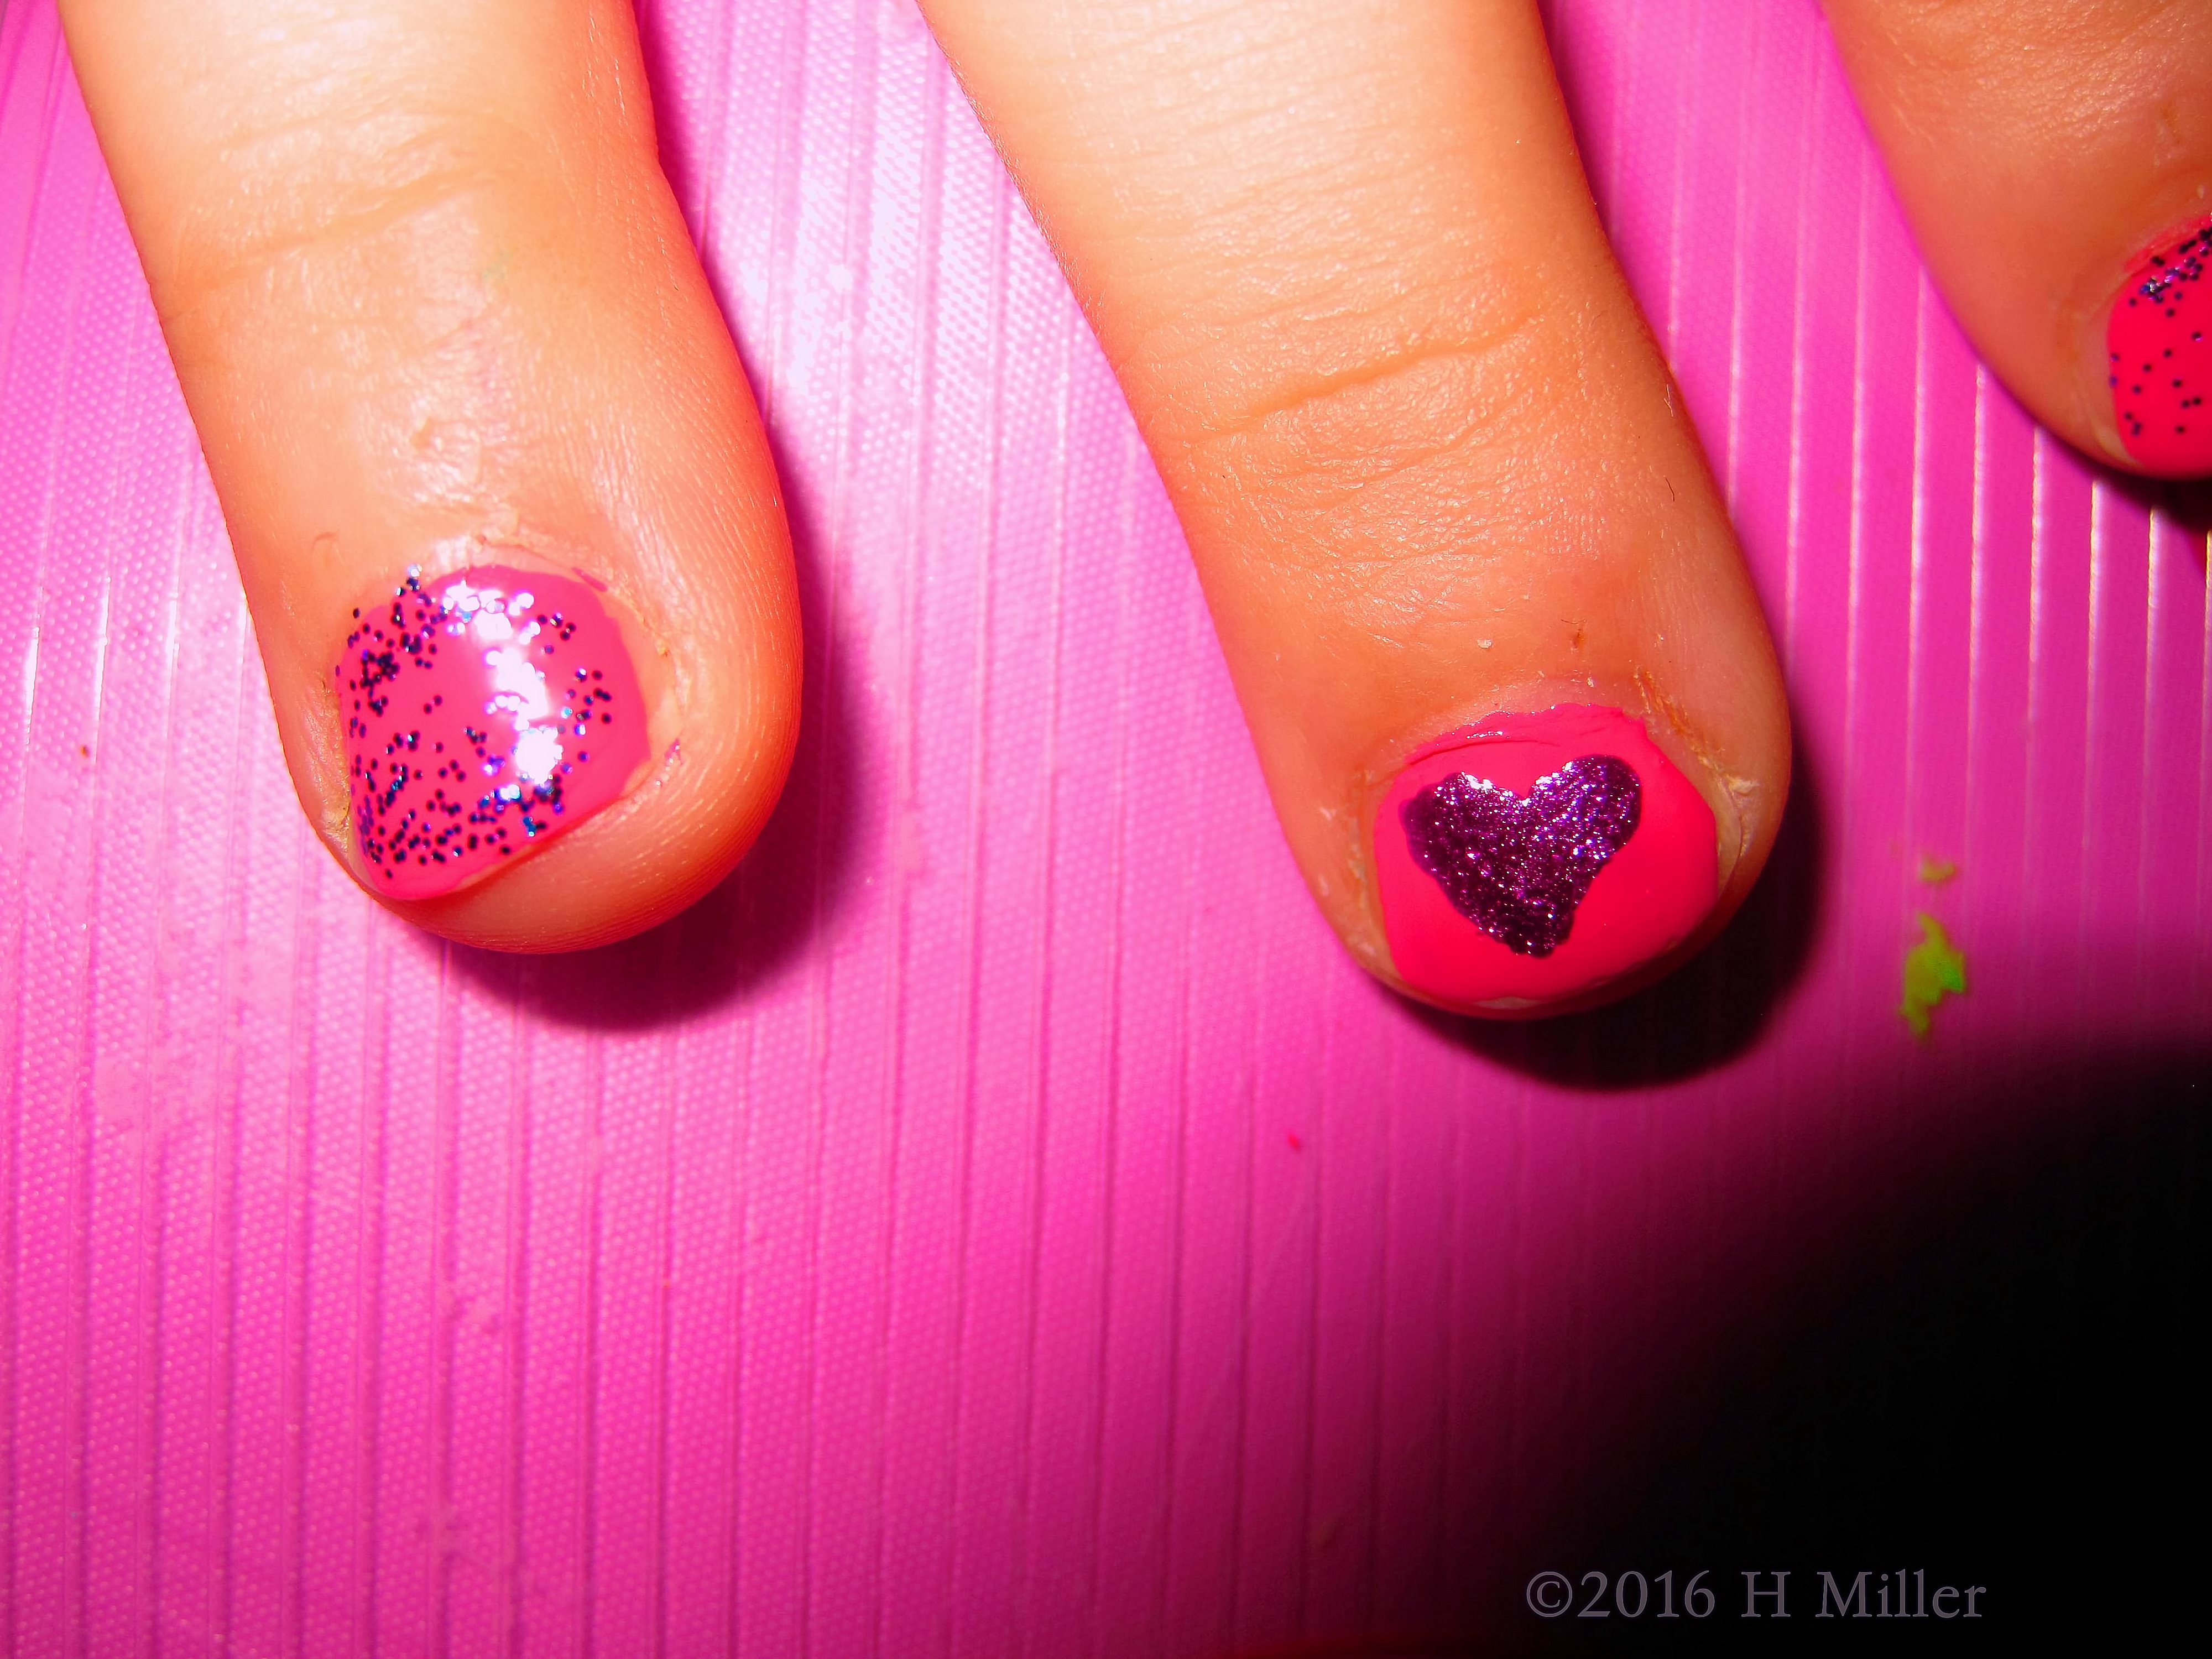 A Very, Very Cool Manicure For Girls With A Nail Design Of A Heart